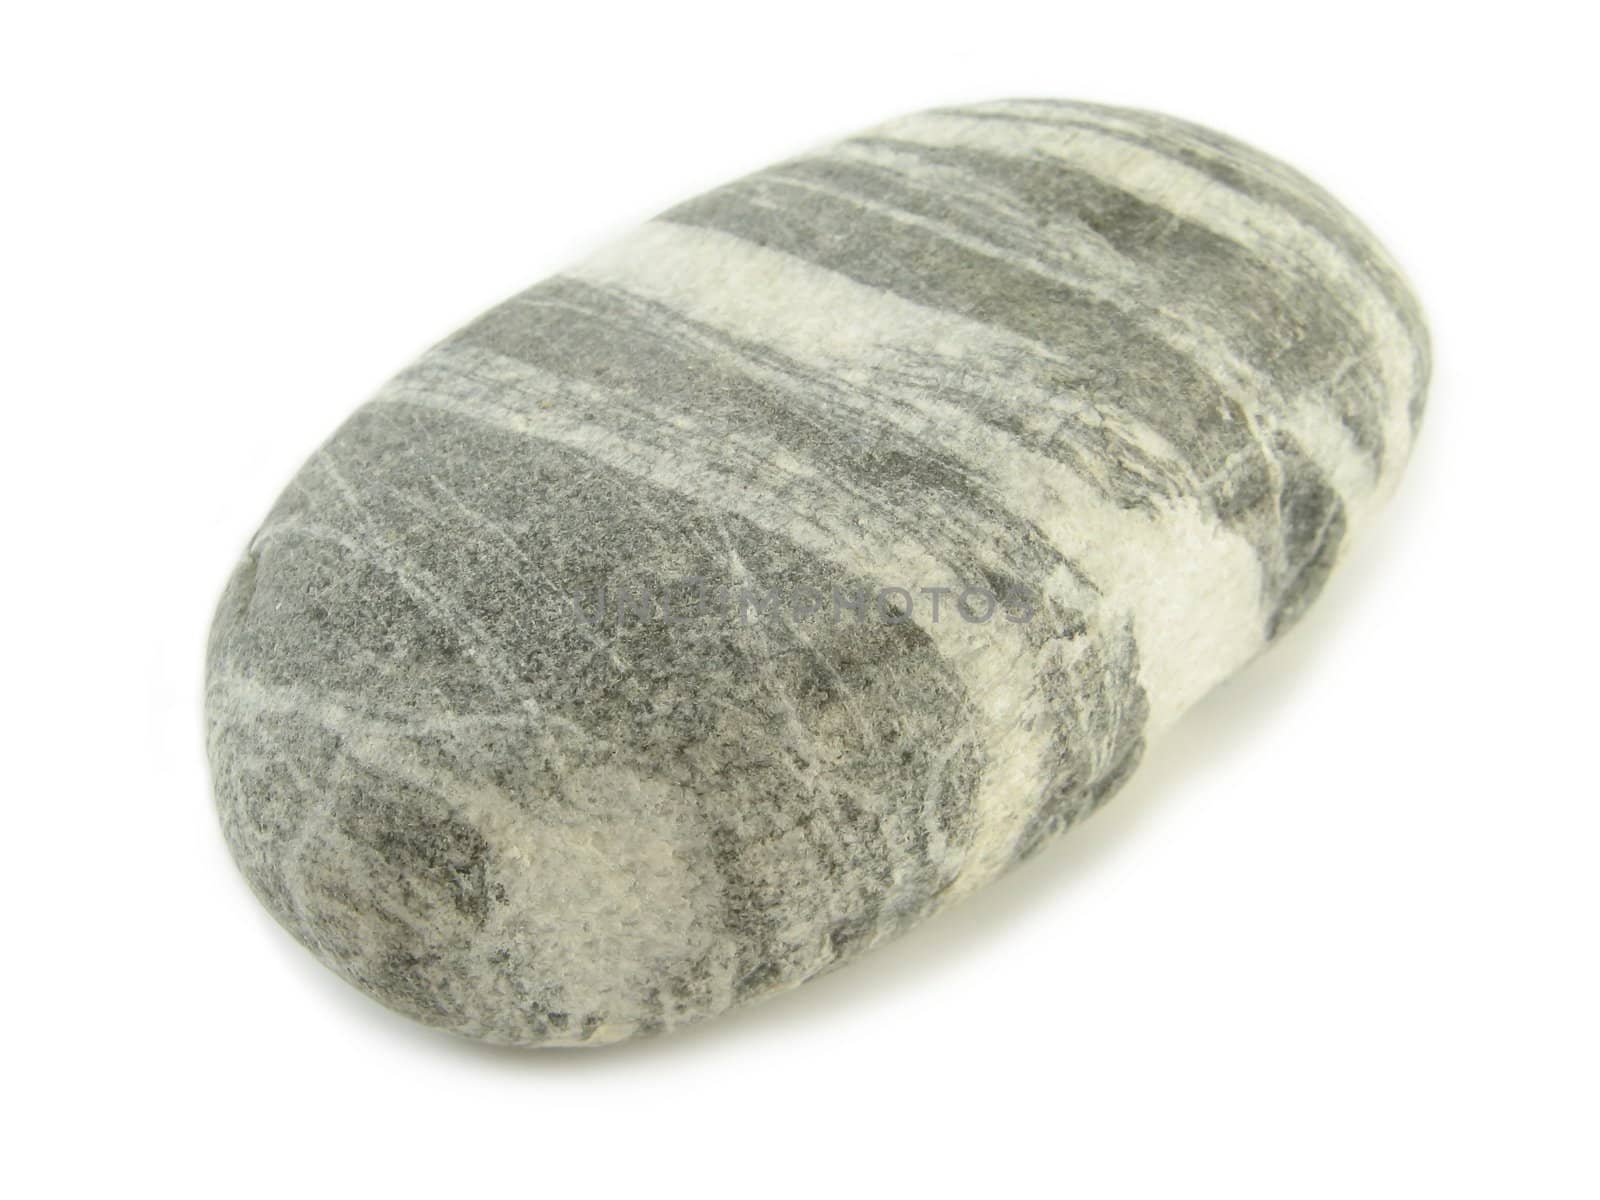 image of a gray stone with white stripes